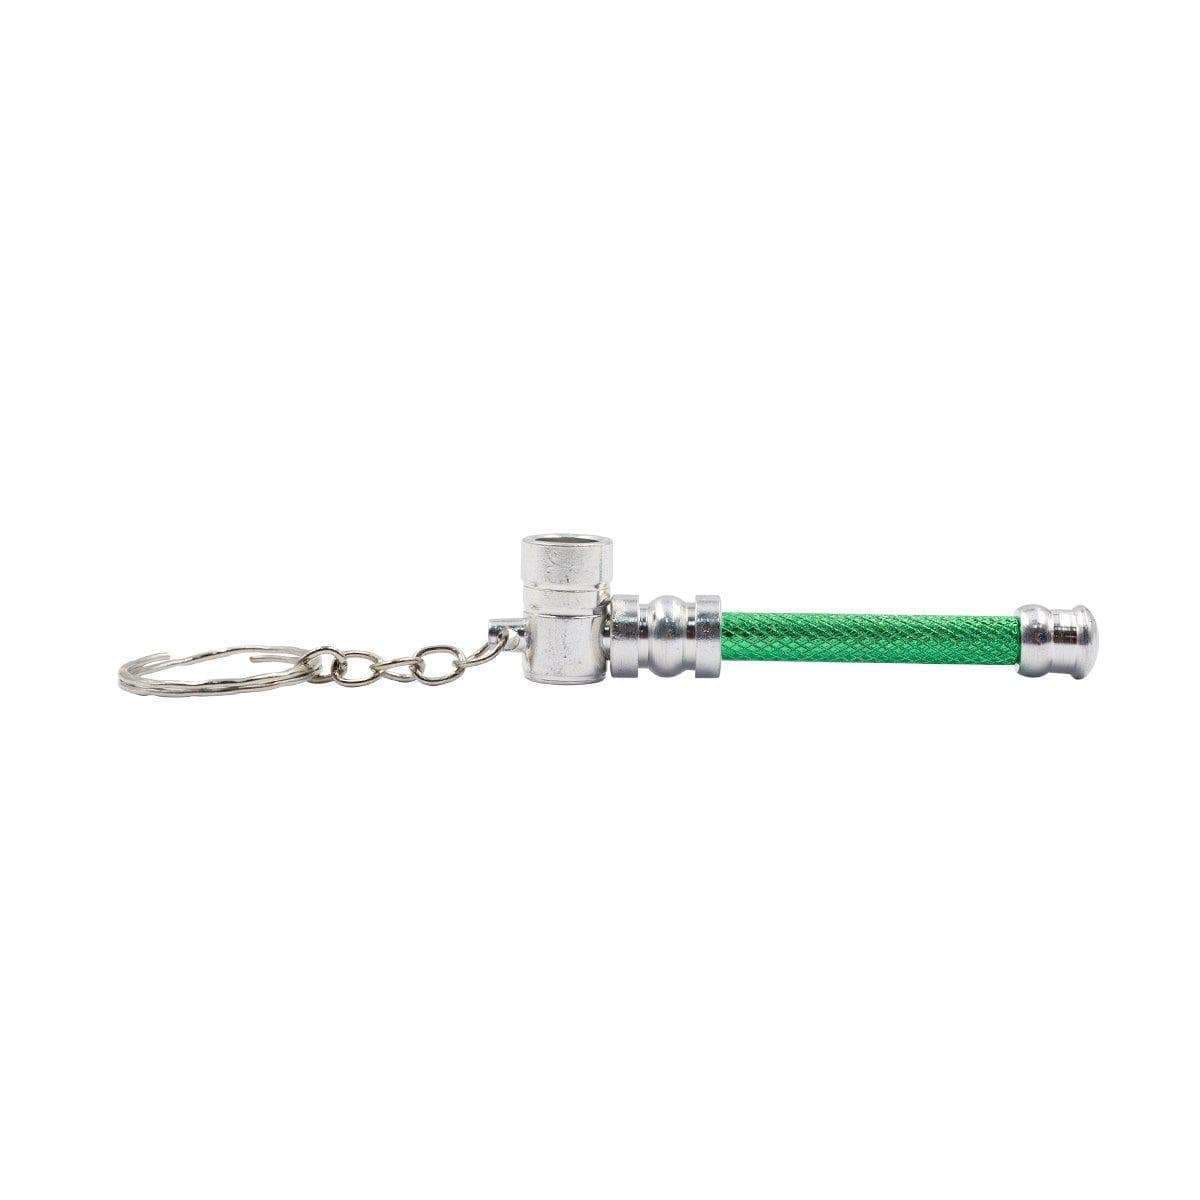 Horizontal Mini keychain pipe in a cylinder hammer-like shape vibrant Silver stainless steel both ends with keyring